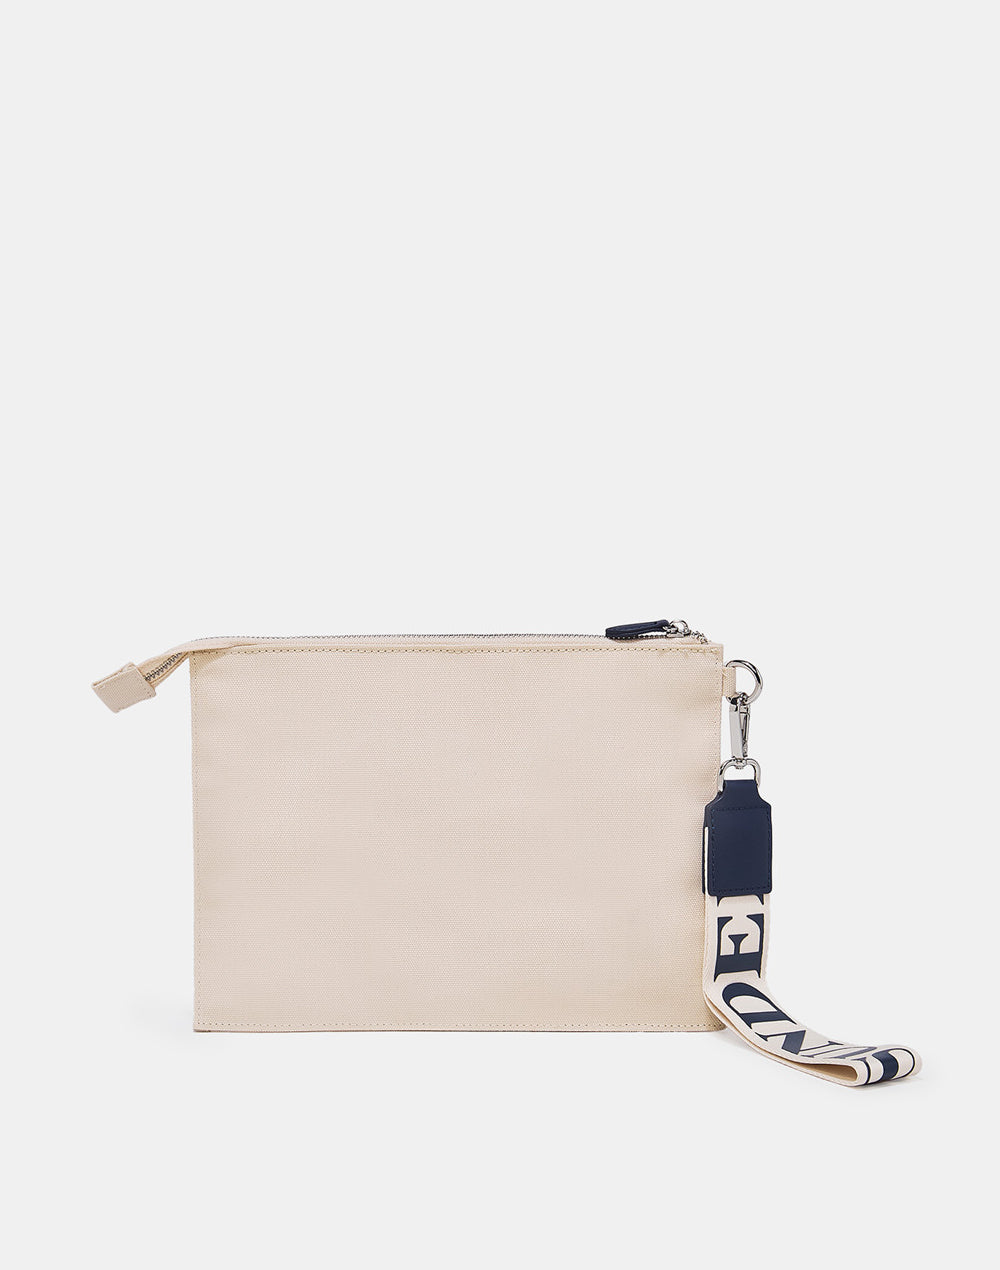 CLUTCH IN CANVAS